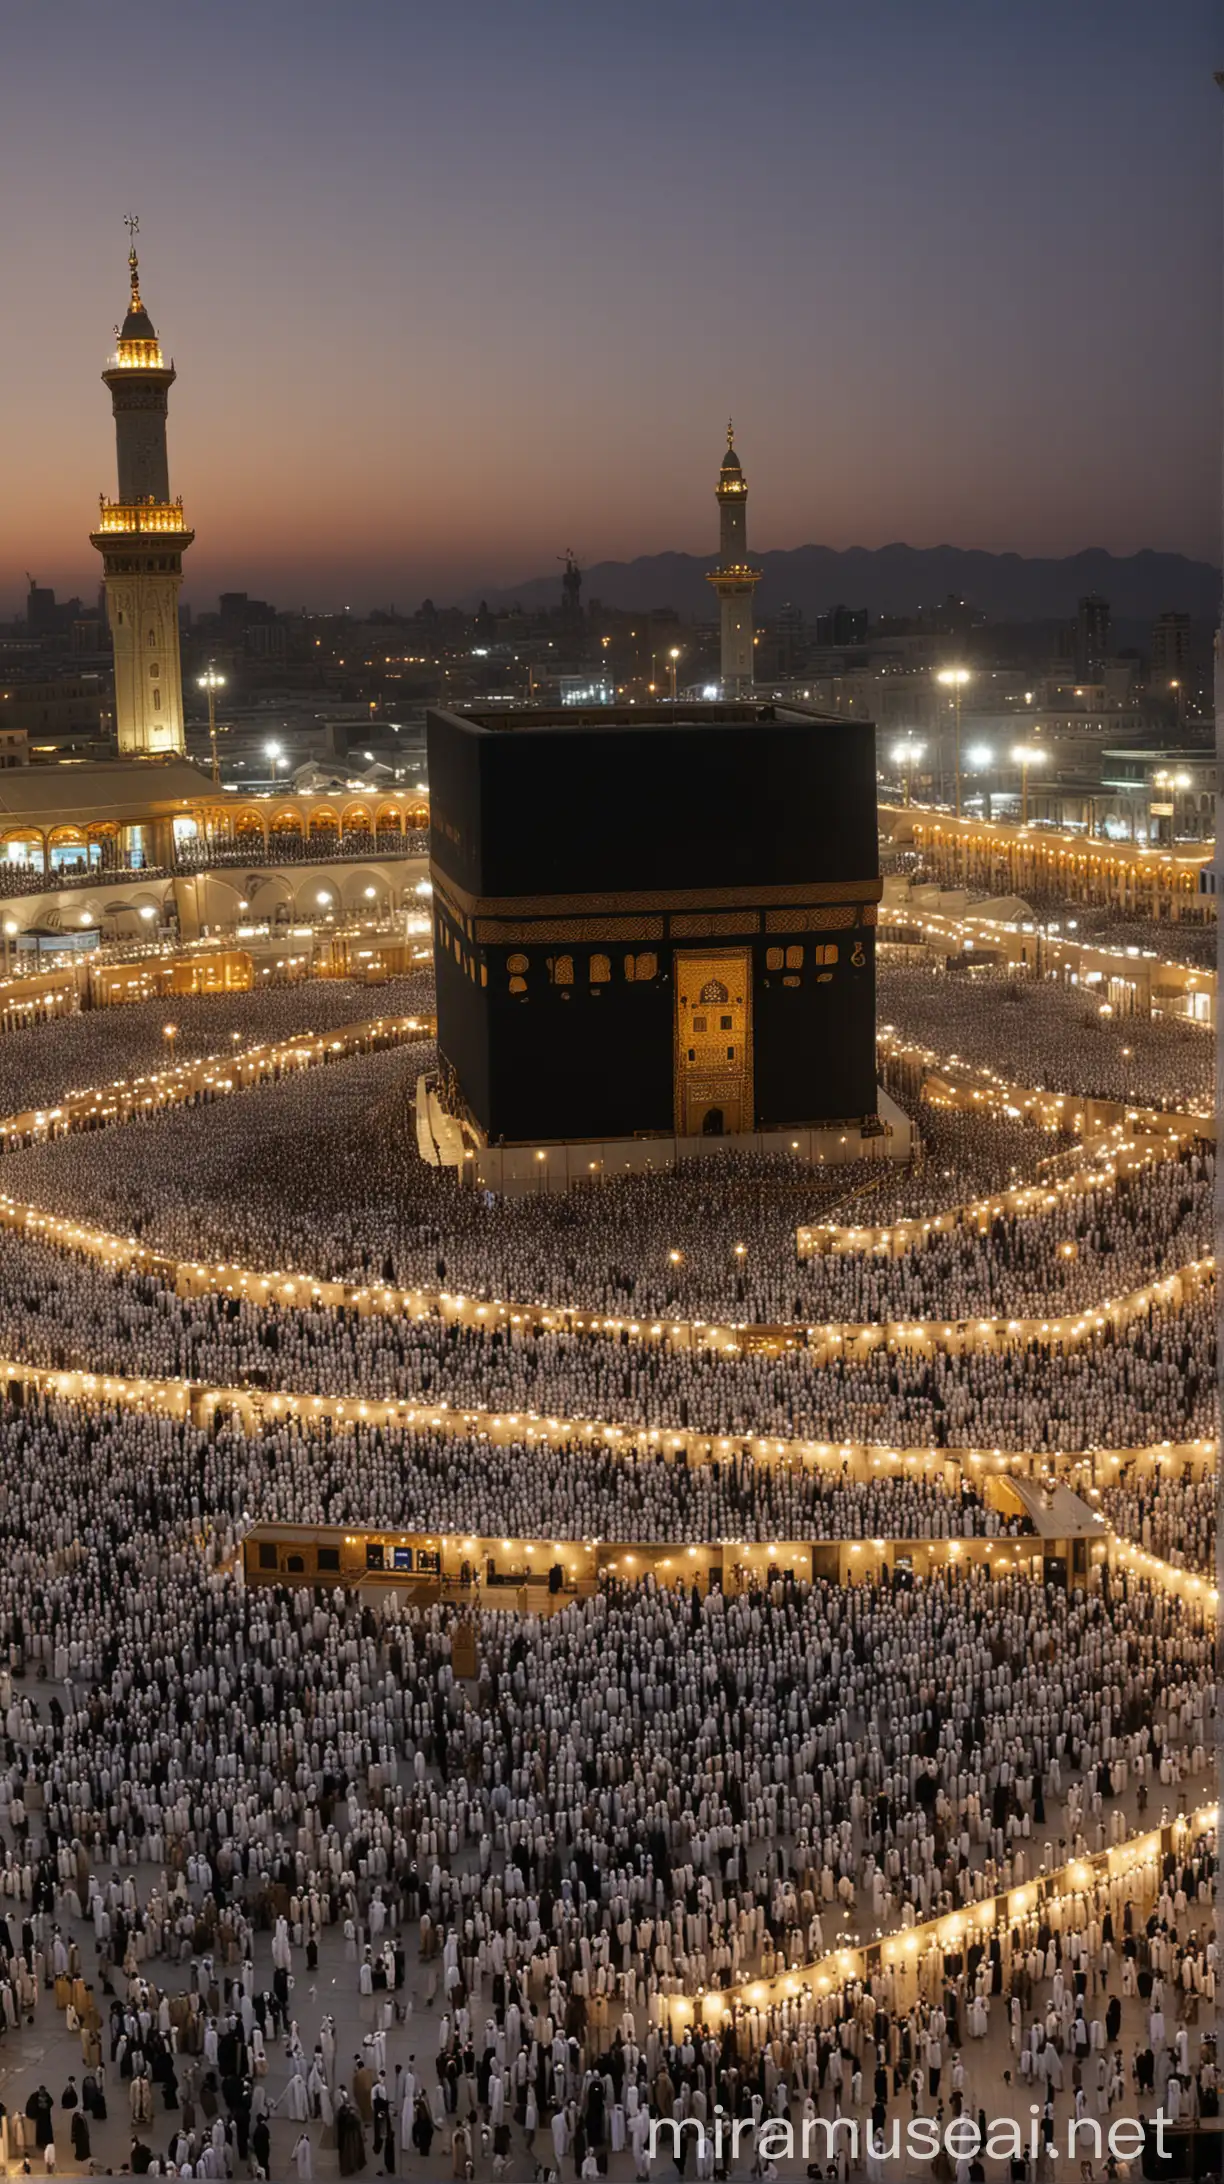 The Kaaba at Dawn:

Description: Capture the serene beauty of the Kaaba, the most sacred site in Islam, illuminated by the soft glow of dawn. Depict the majestic structure surrounded by devout pilgrims circumambulating it in a unified expression of faith. ISLAMIC TRADITION hd AND 4kDONT SHOW THE FACE